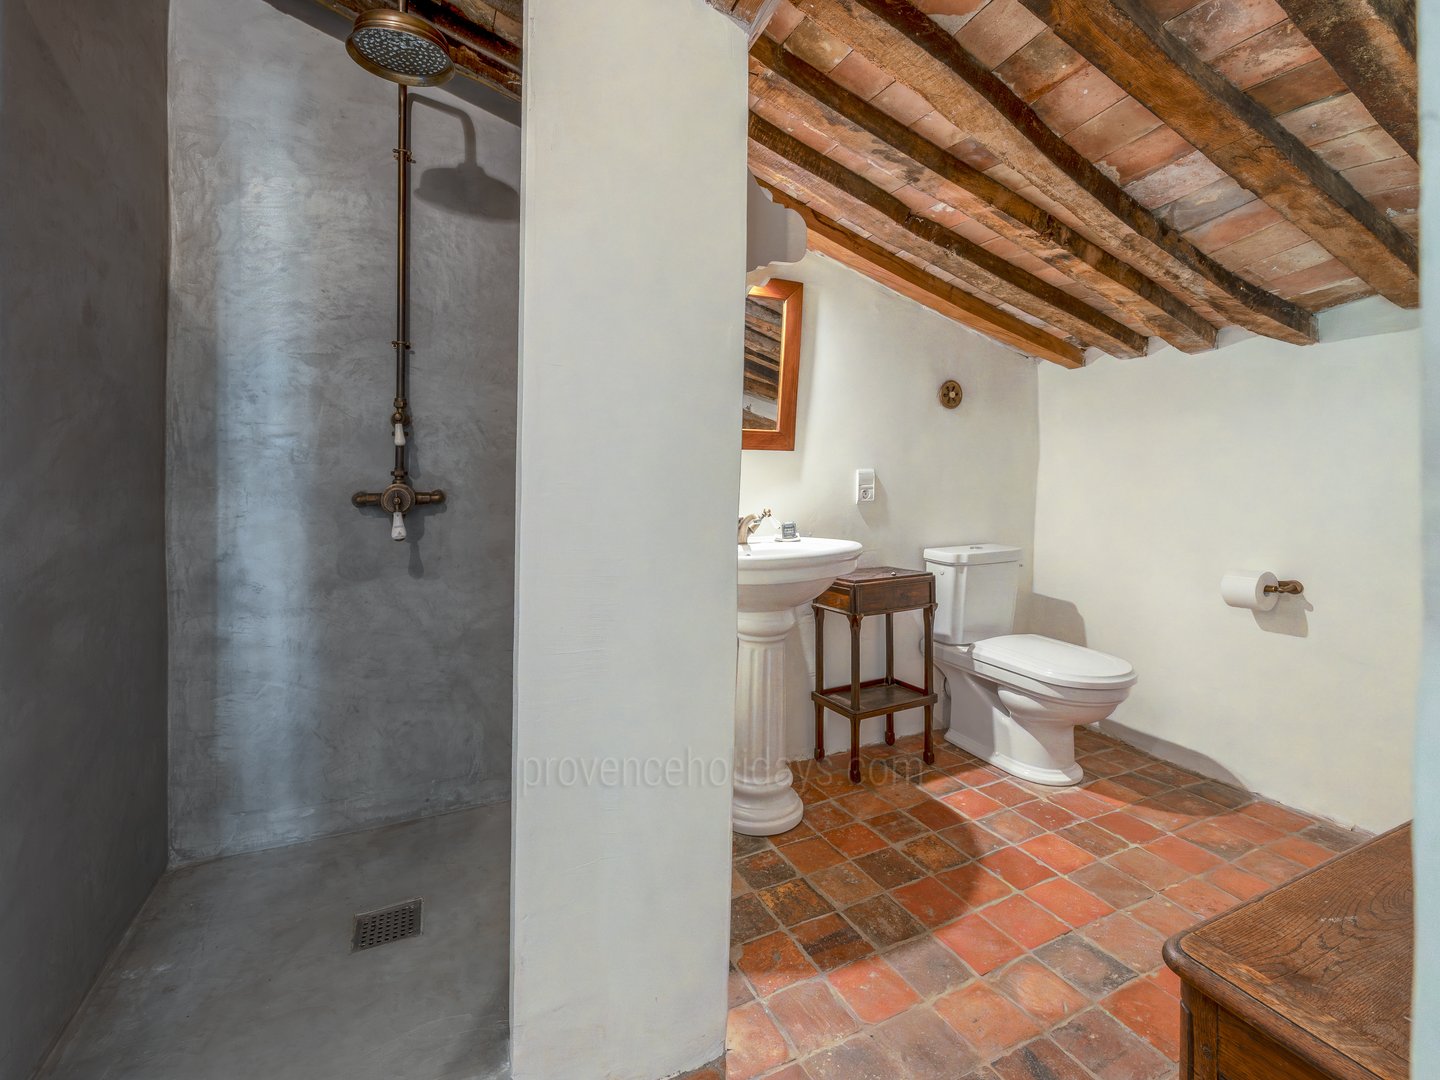 18th century Bastide with views of Luberon for sale - Bonnieux - 48